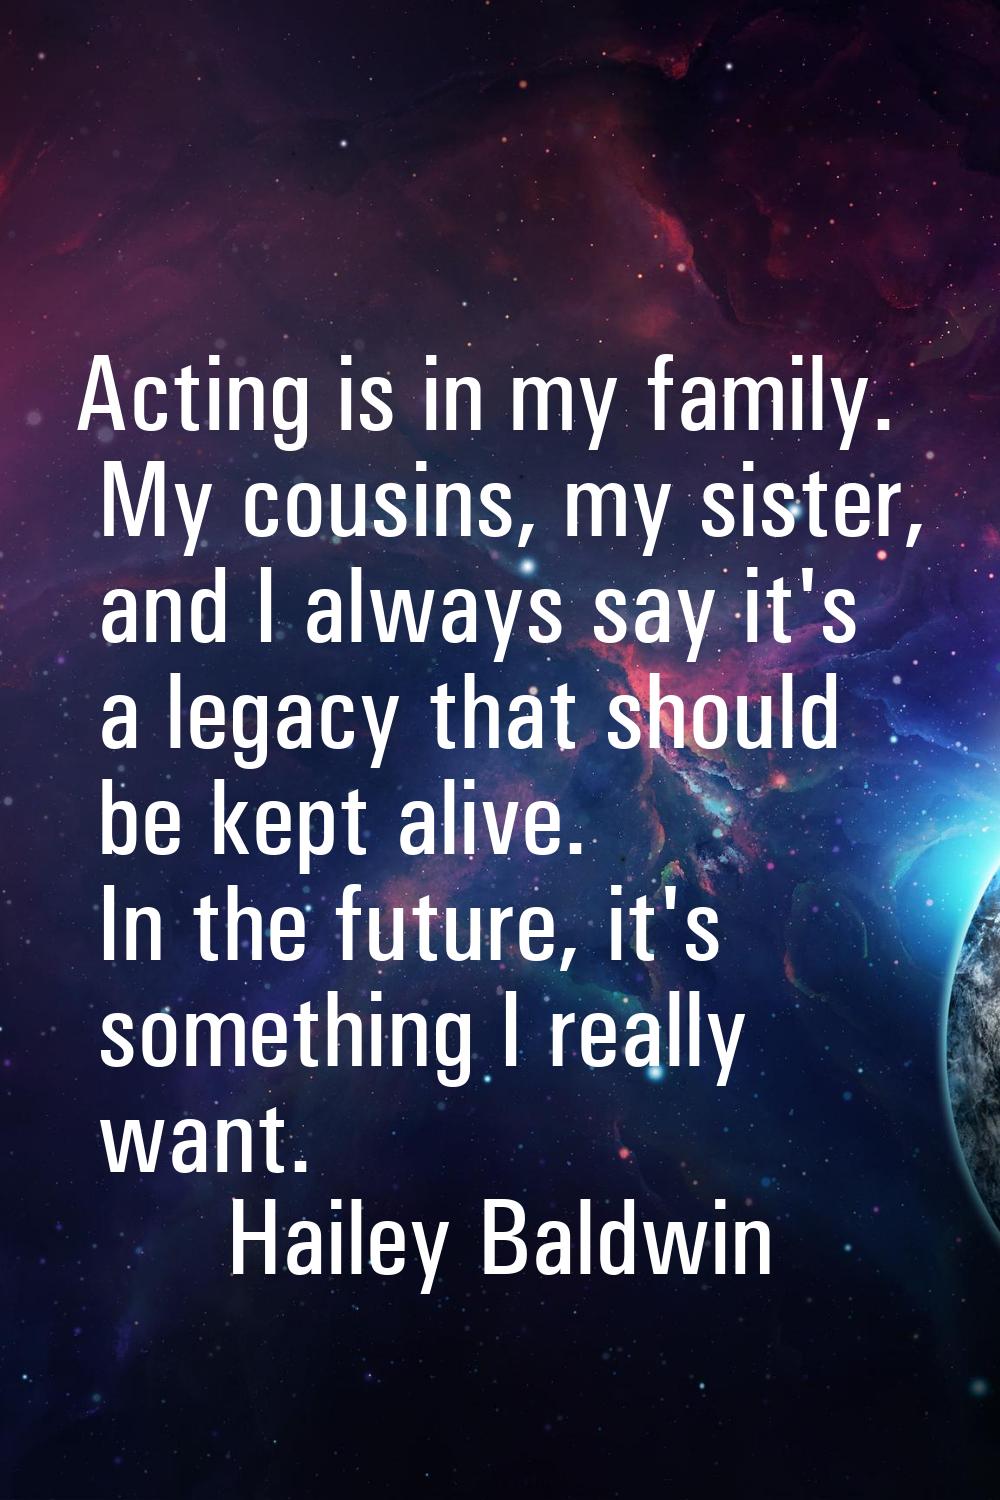 Acting is in my family. My cousins, my sister, and I always say it's a legacy that should be kept a